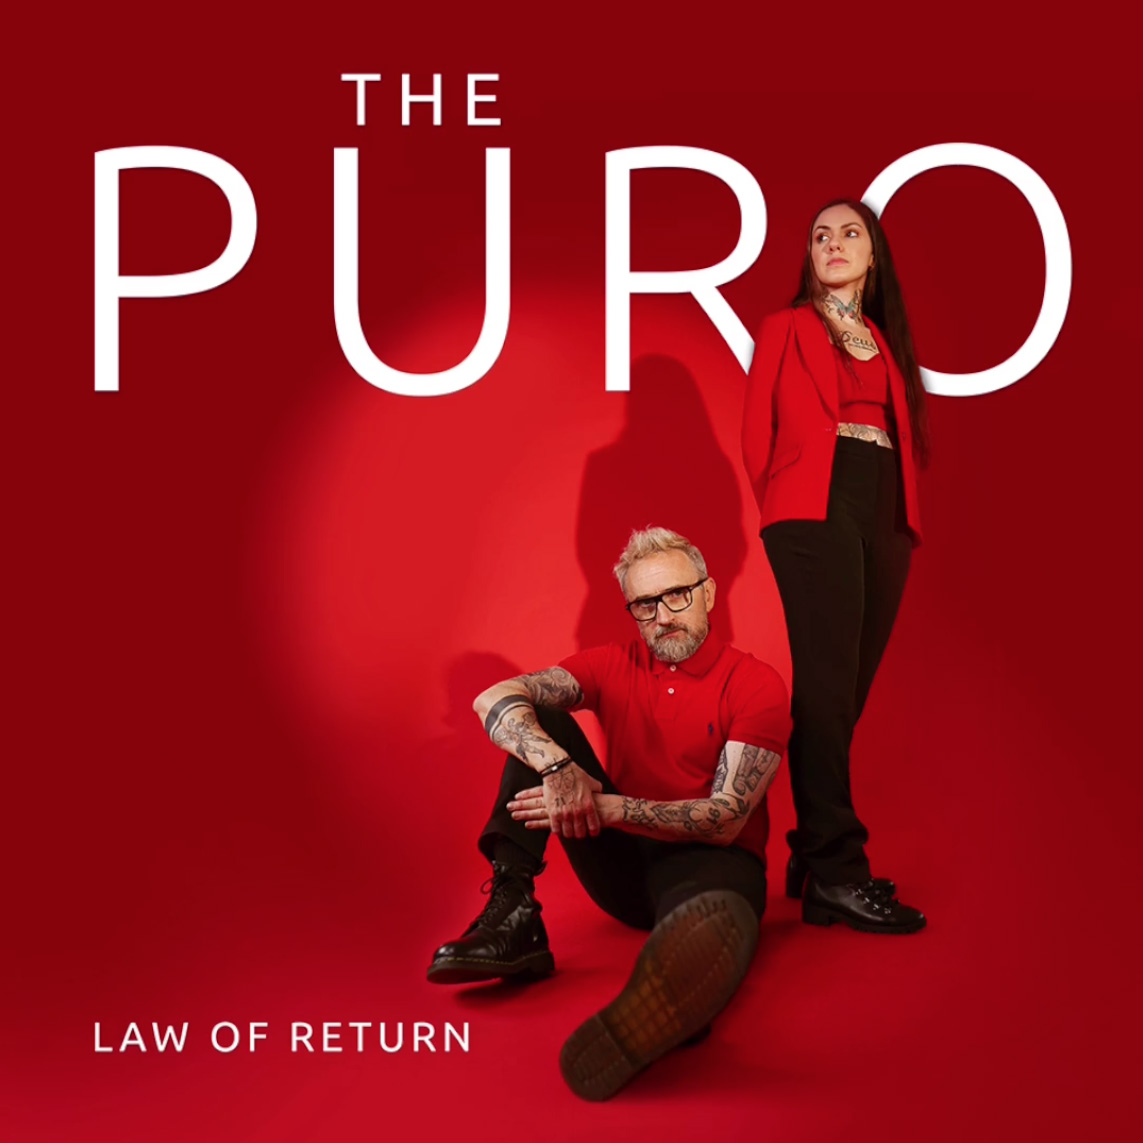 Out today: 'Law Of Return' by The Puro
#NoelHogan #MellPeck

cranberriesworld.com/2022/10/14/out…